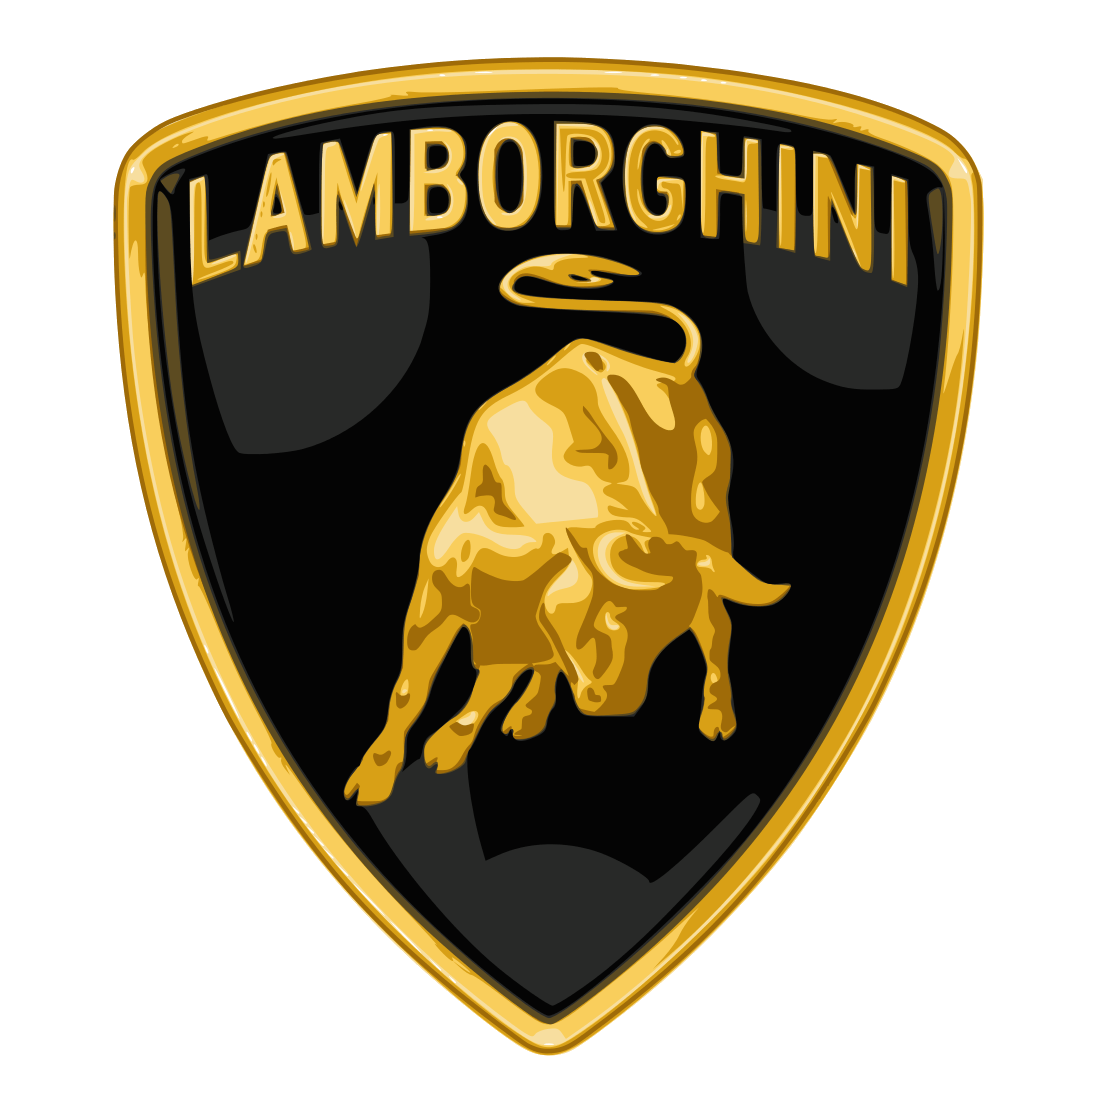 Lamborghani Logo - Lamborghini Logo, Lamborghini Car Symbol Meaning and History | Car ...